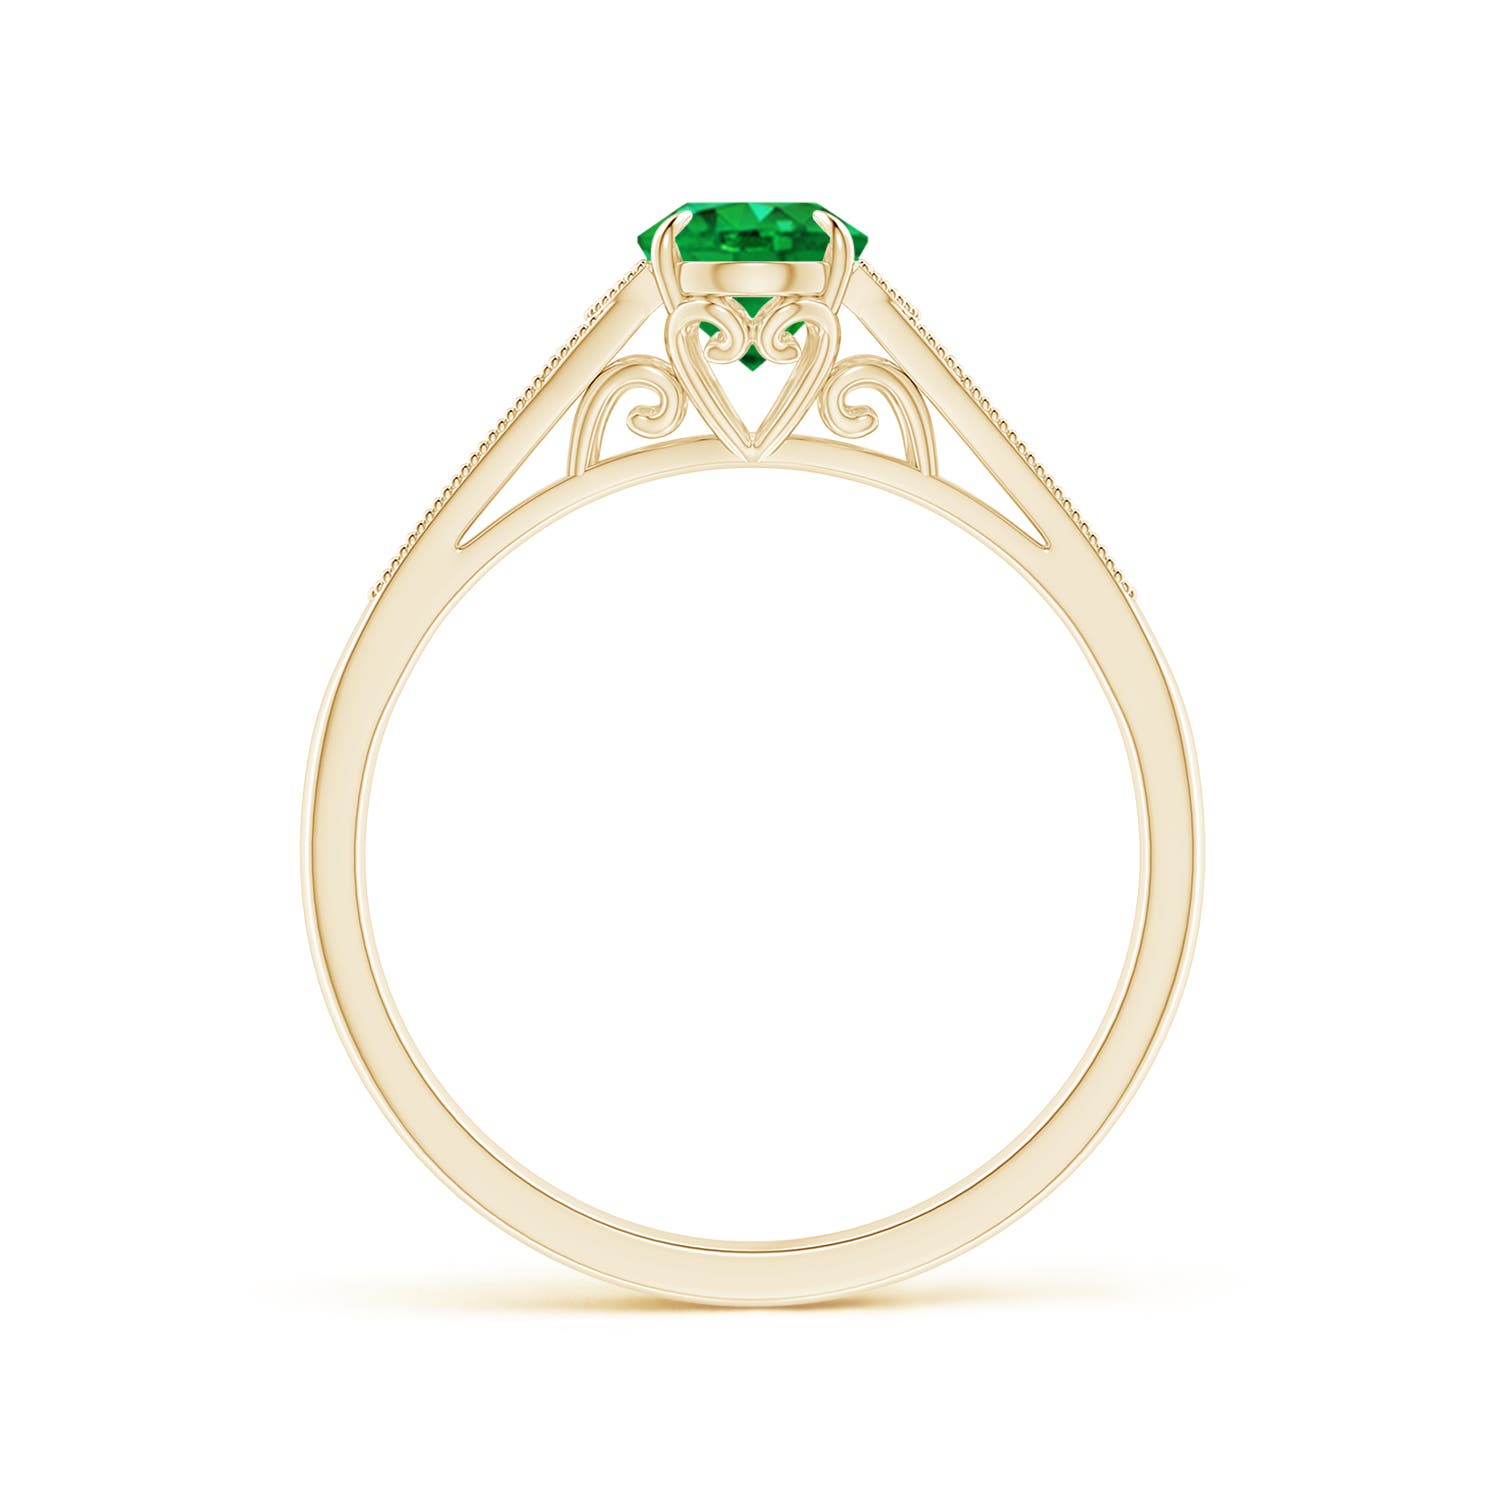 AAA - Emerald / 0.77 CT / 14 KT Yellow Gold